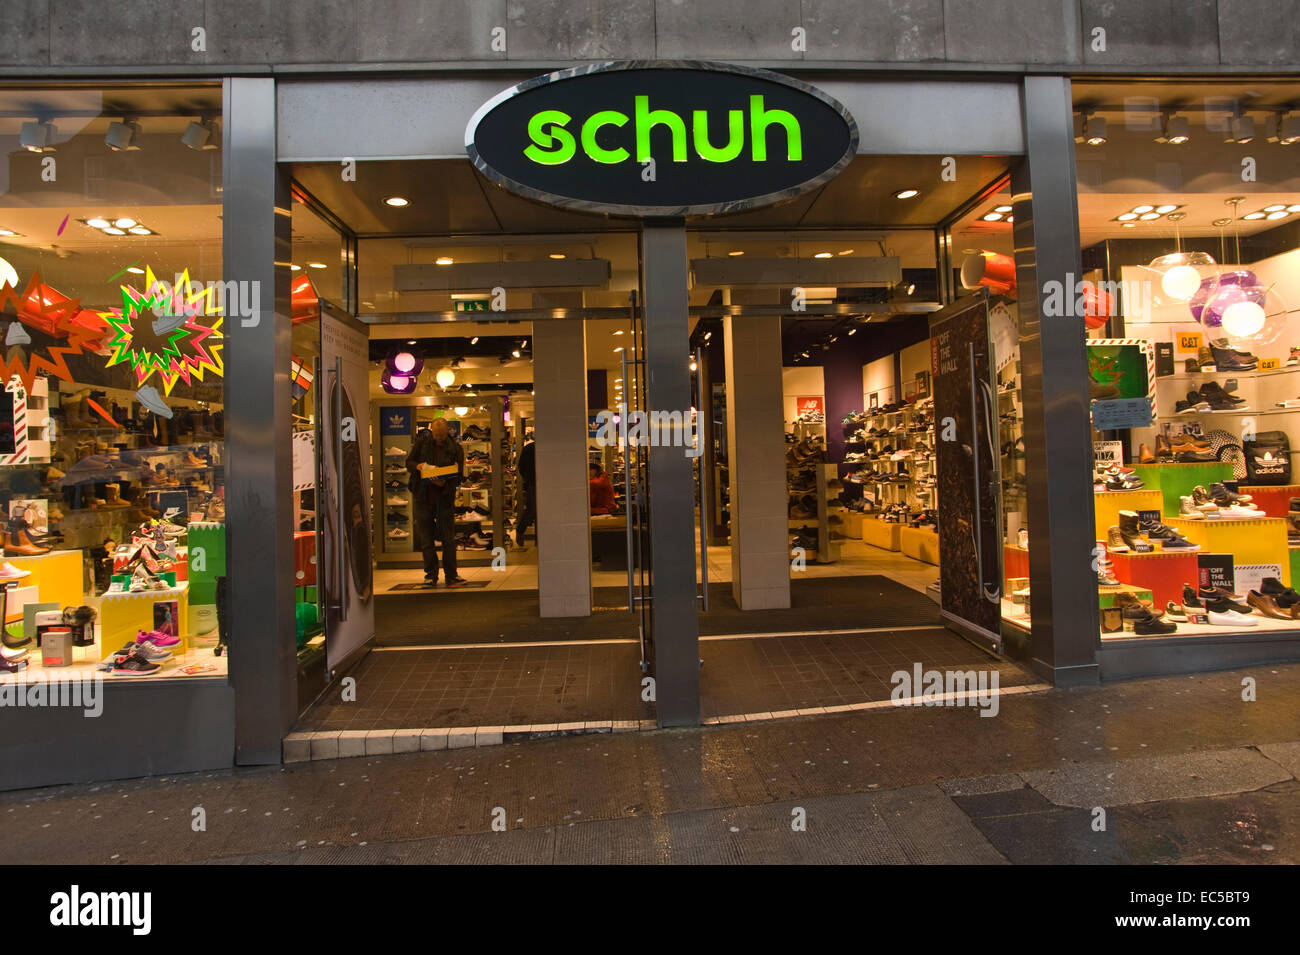 Schuh Stores High Resolution Stock Photography and Images - Alamy